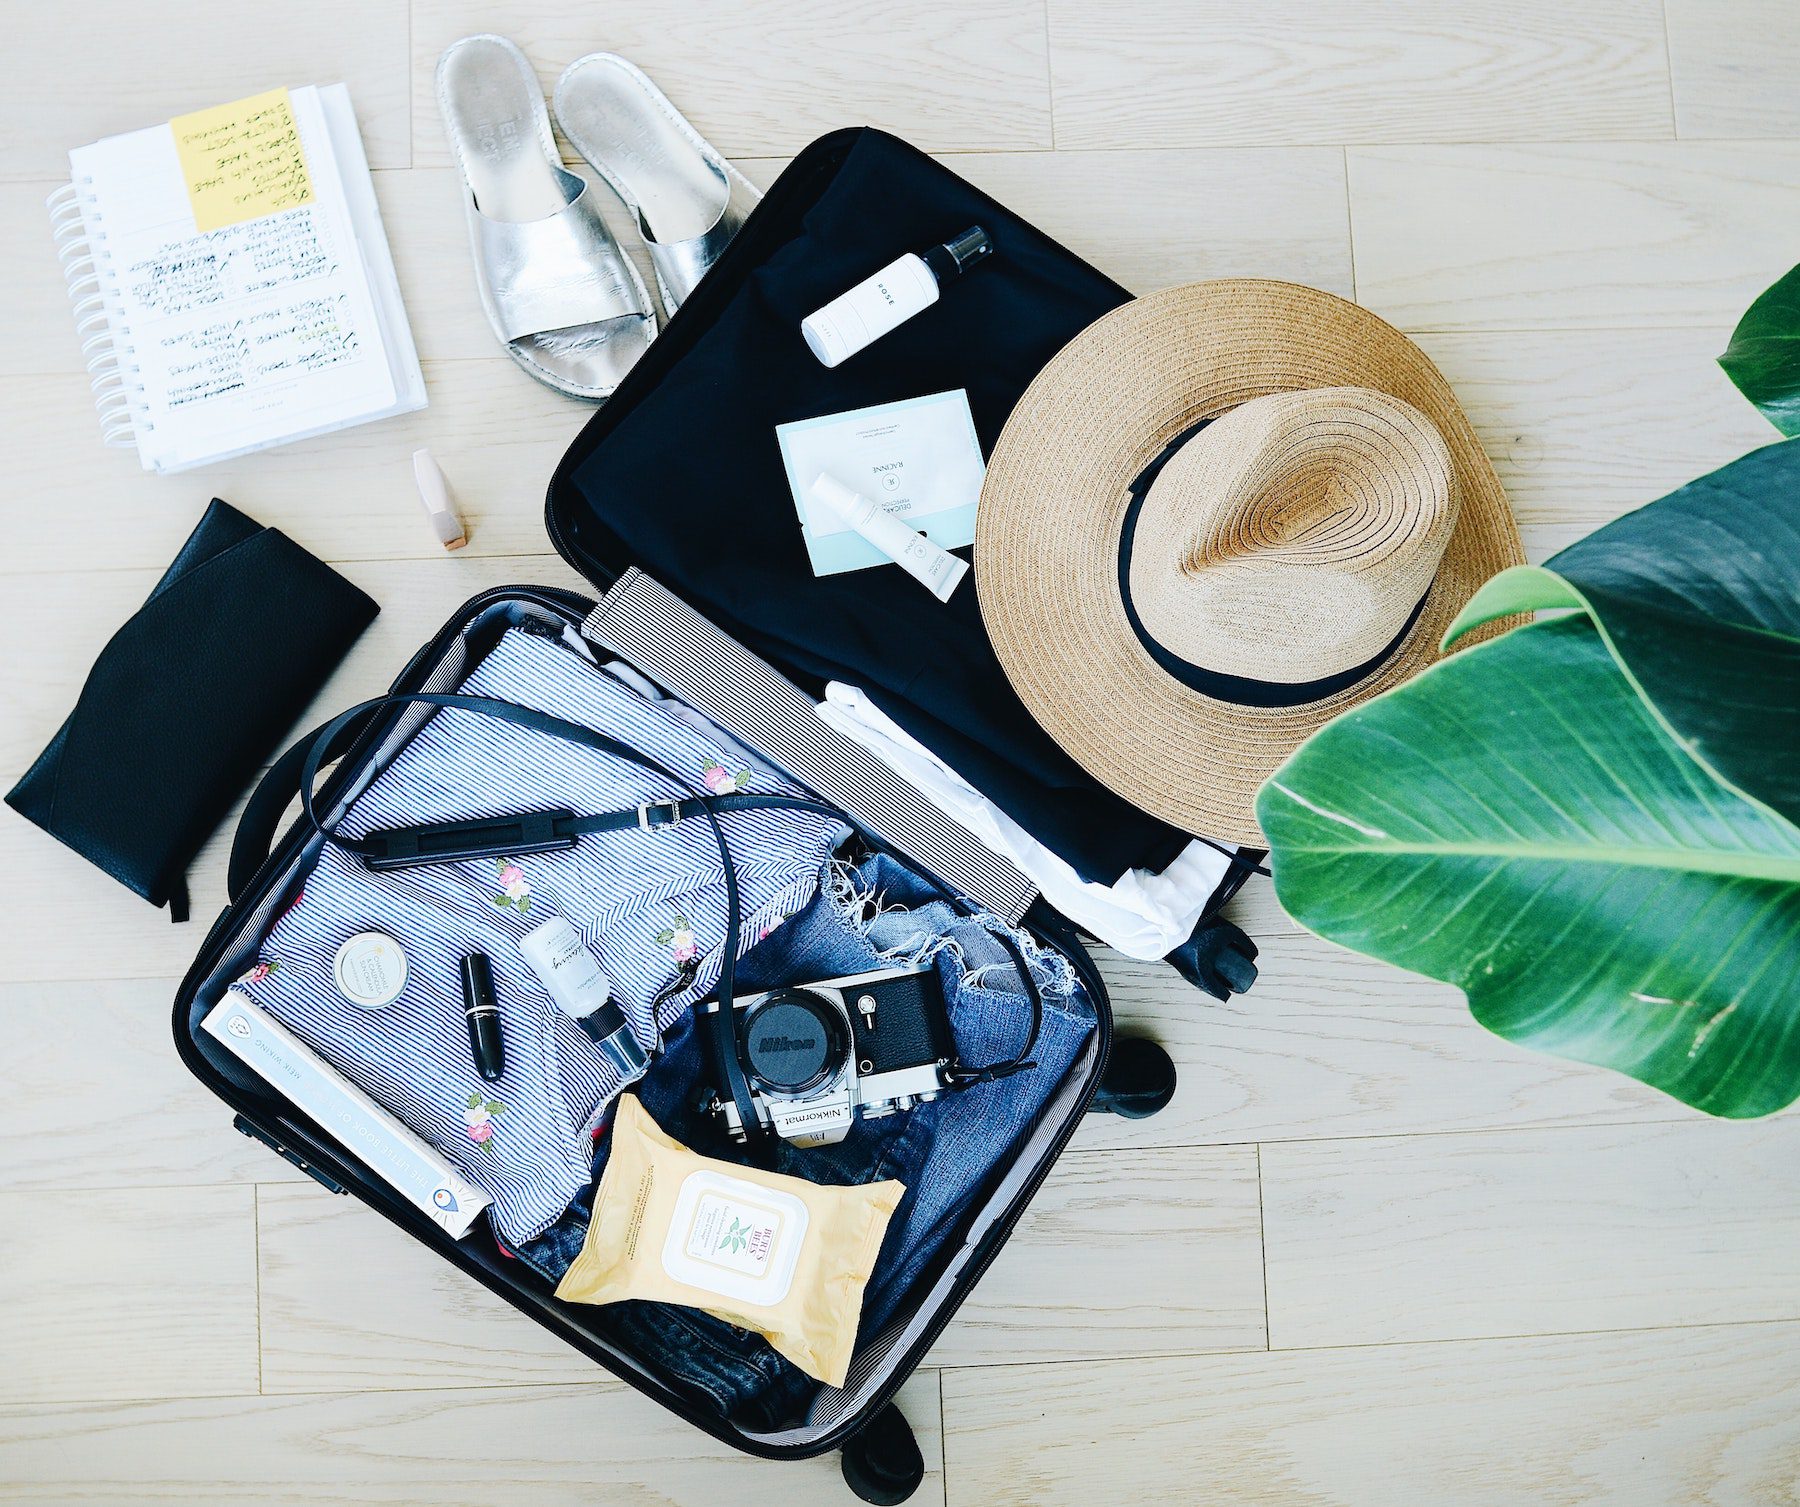 Suitcase flatlay featuring hat, jeans, camera, pen and paper, shoes, and other travel necessities. 